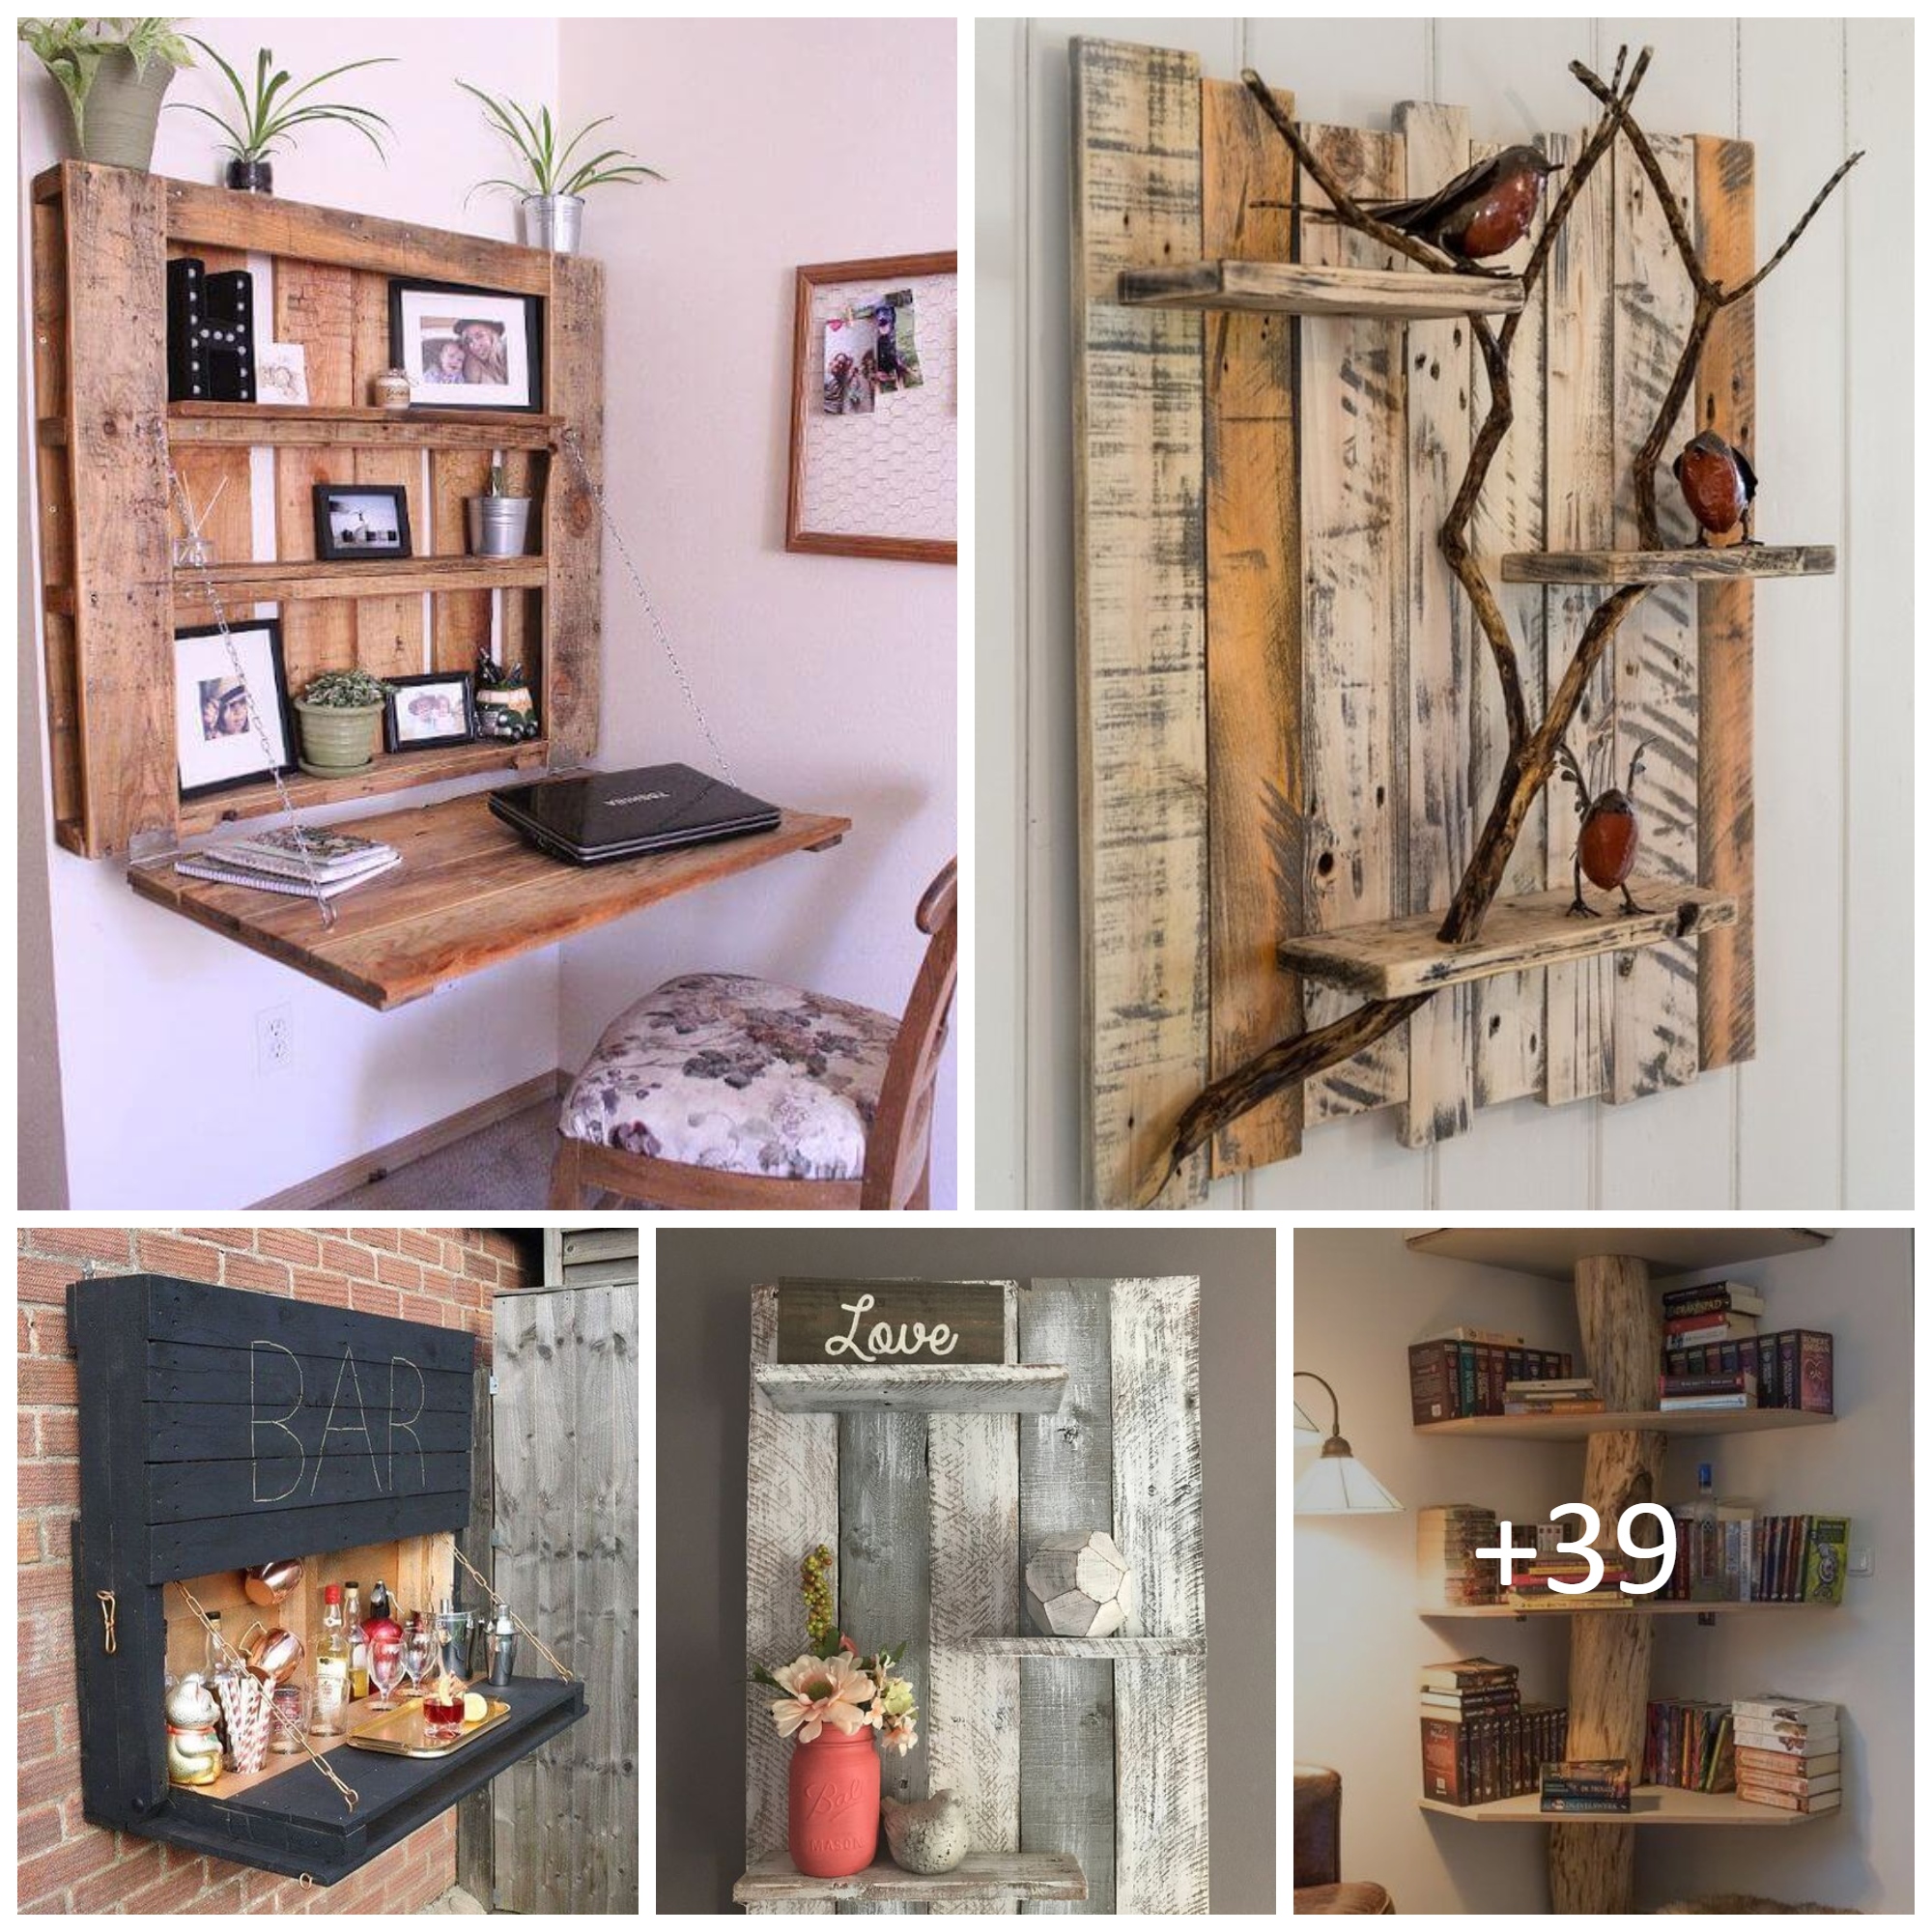 Easy-To-Craft Pallet Shelves